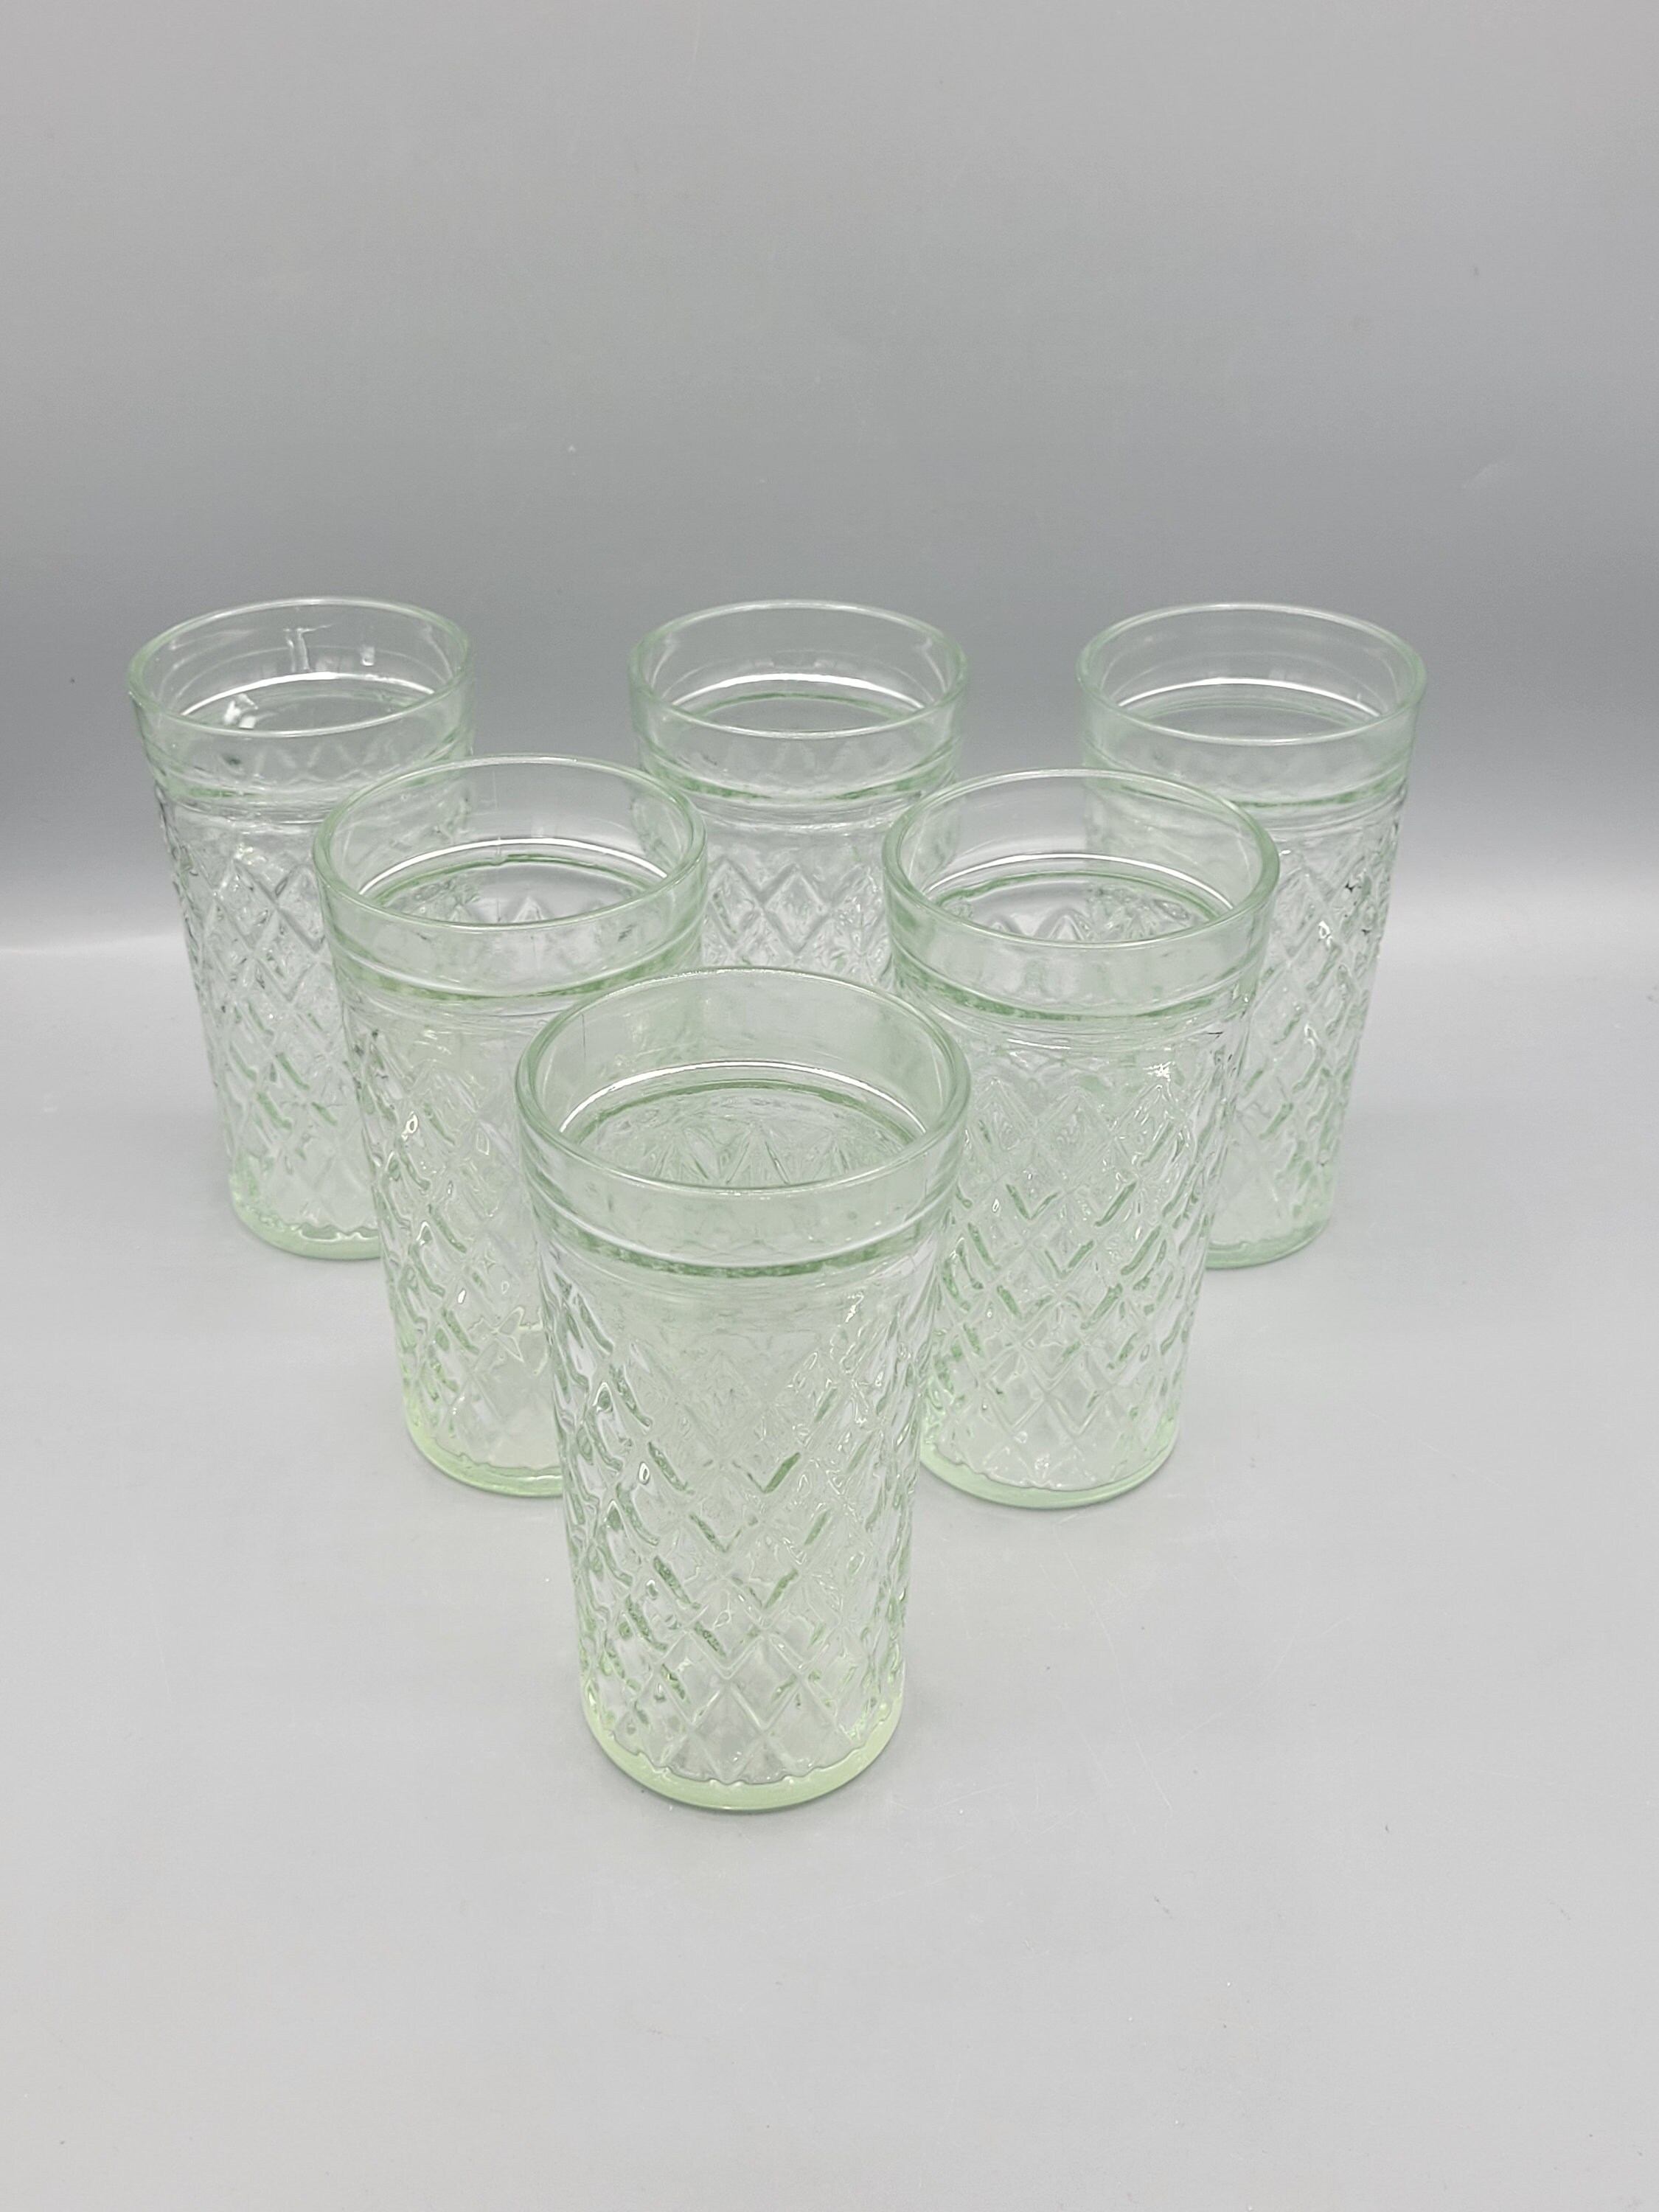 Thick Diamond Quilted Jelly Jar Drinking Glasses Set of 4 Everyday